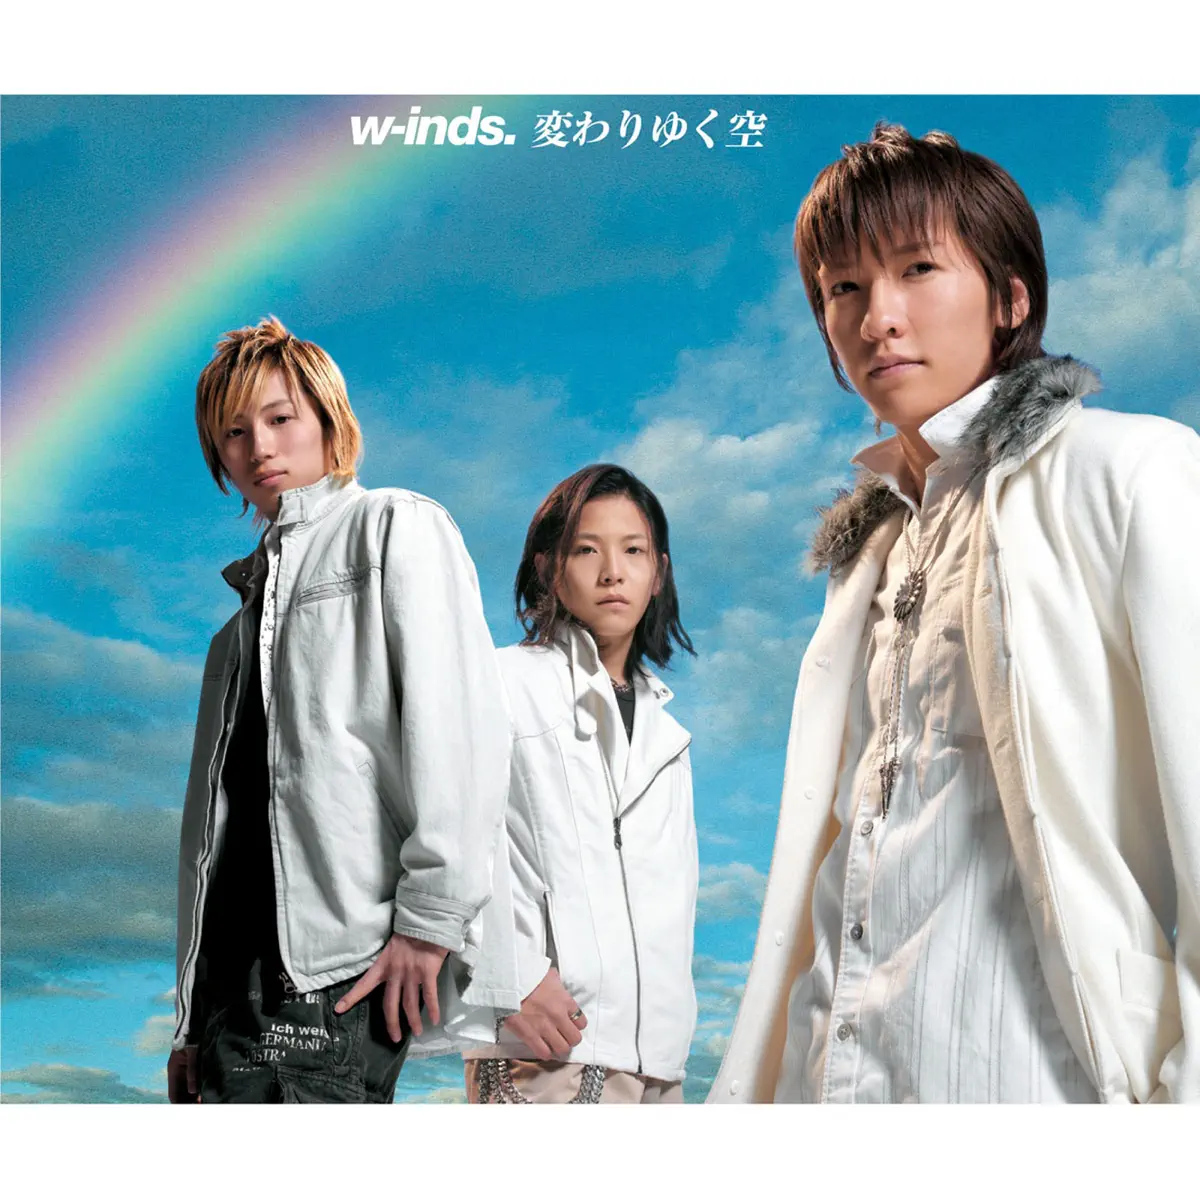 w-inds. - 変わりゆく空 - EP (2005) [iTunes Plus AAC M4A]-新房子